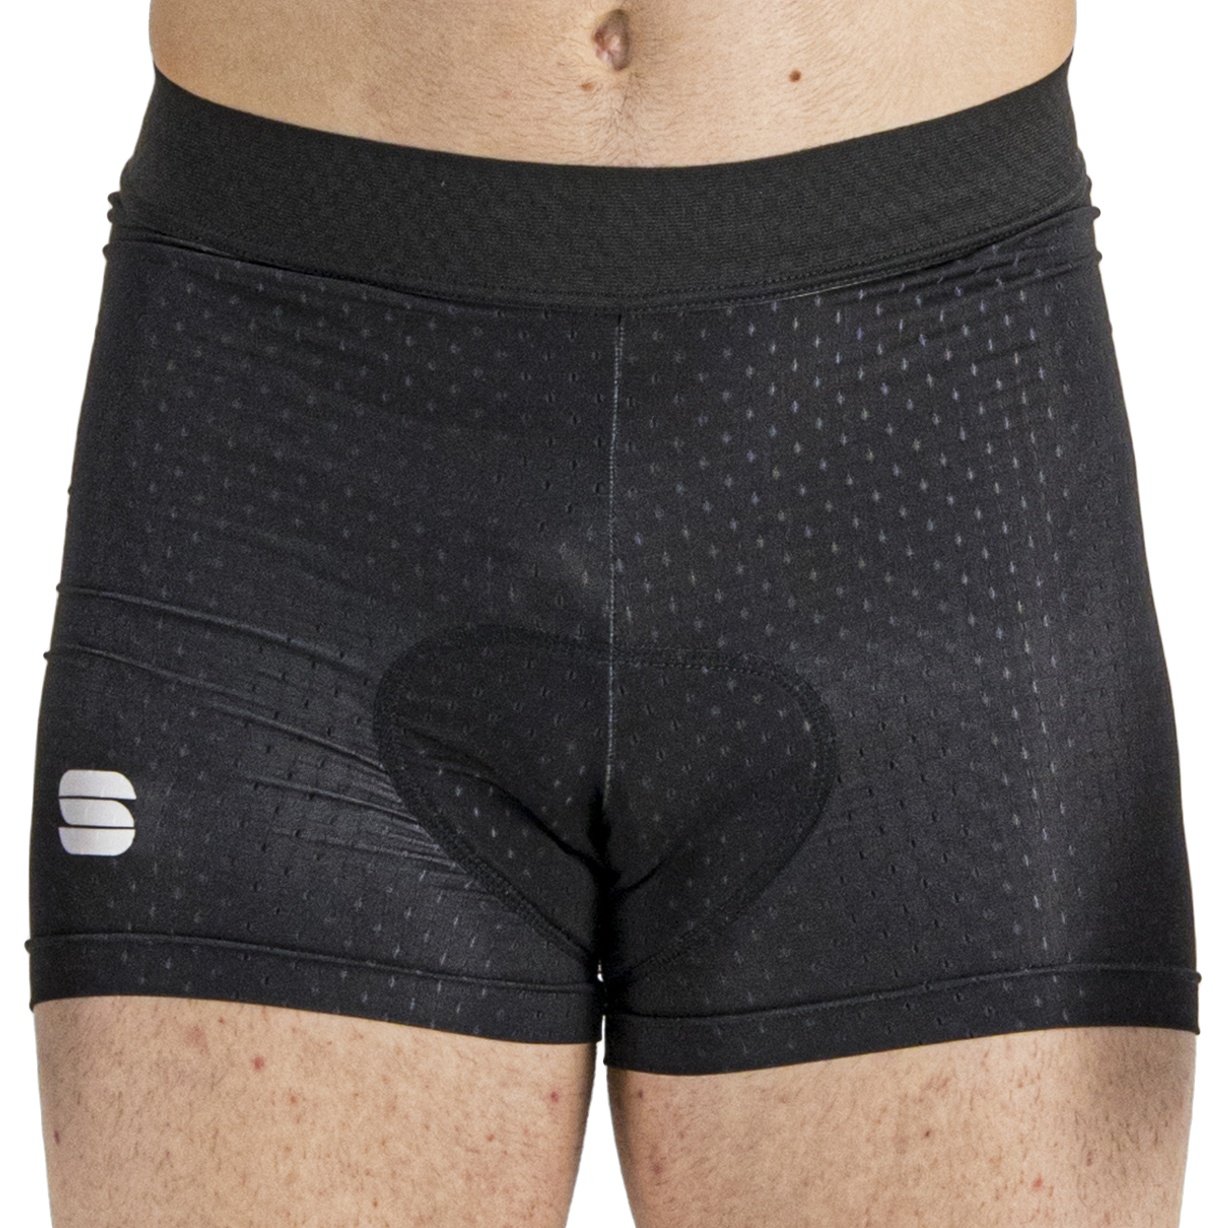 Picture of Sportful Cycling Undershorts - 002 Black